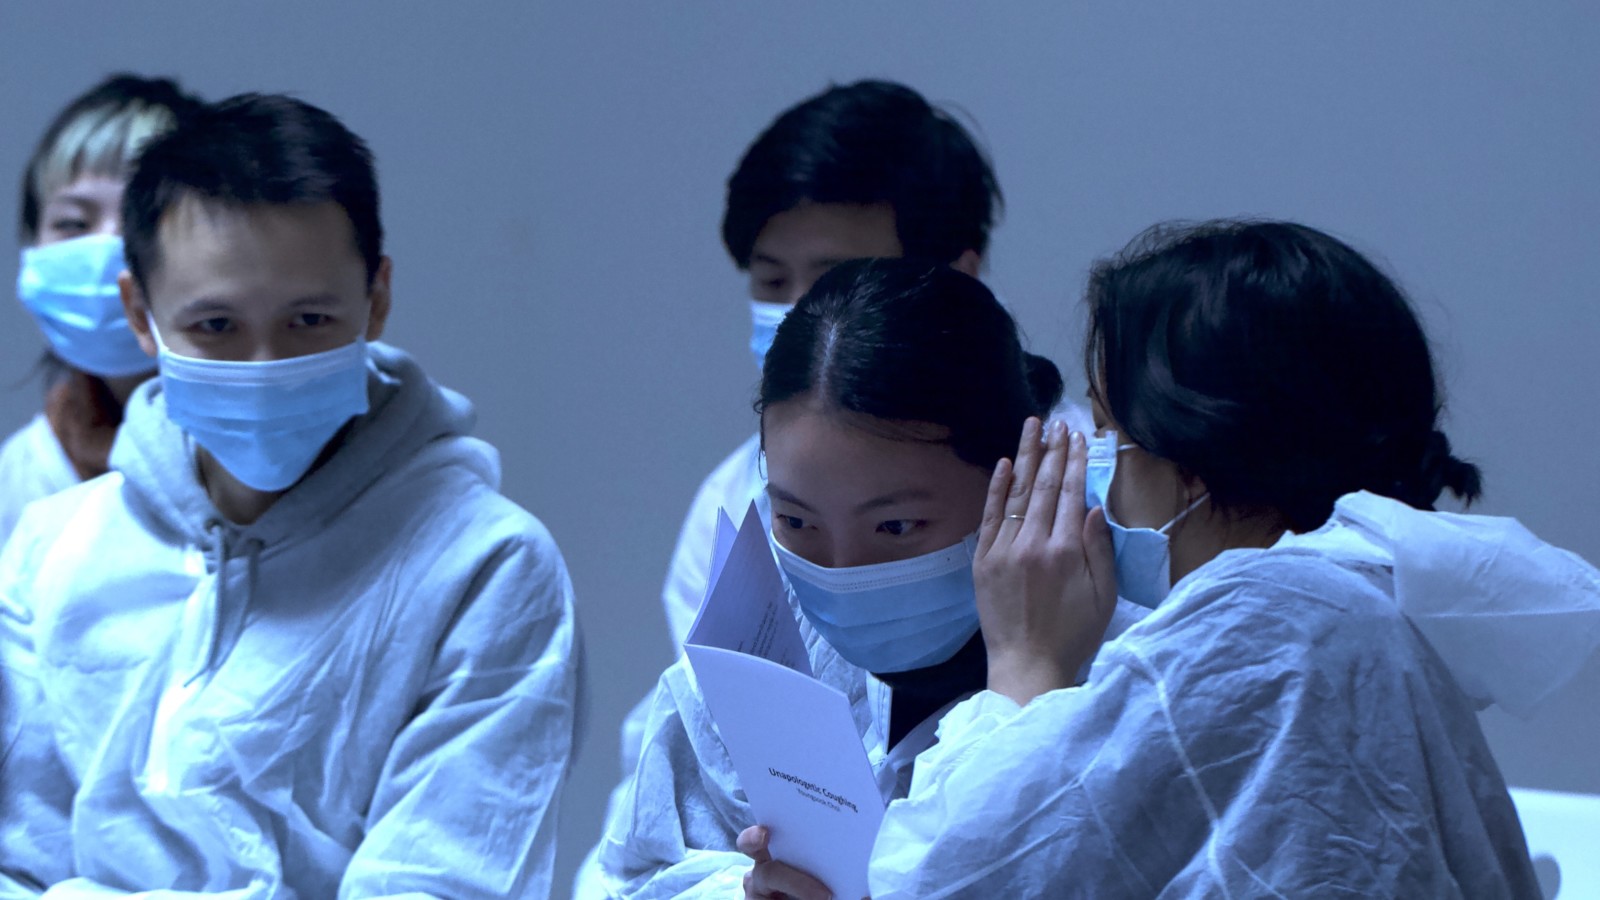 A group of East Asian audience members wear face masks and white overalls. A person whispers into the ear of another person who is holding a performance text. Other audience members watch.